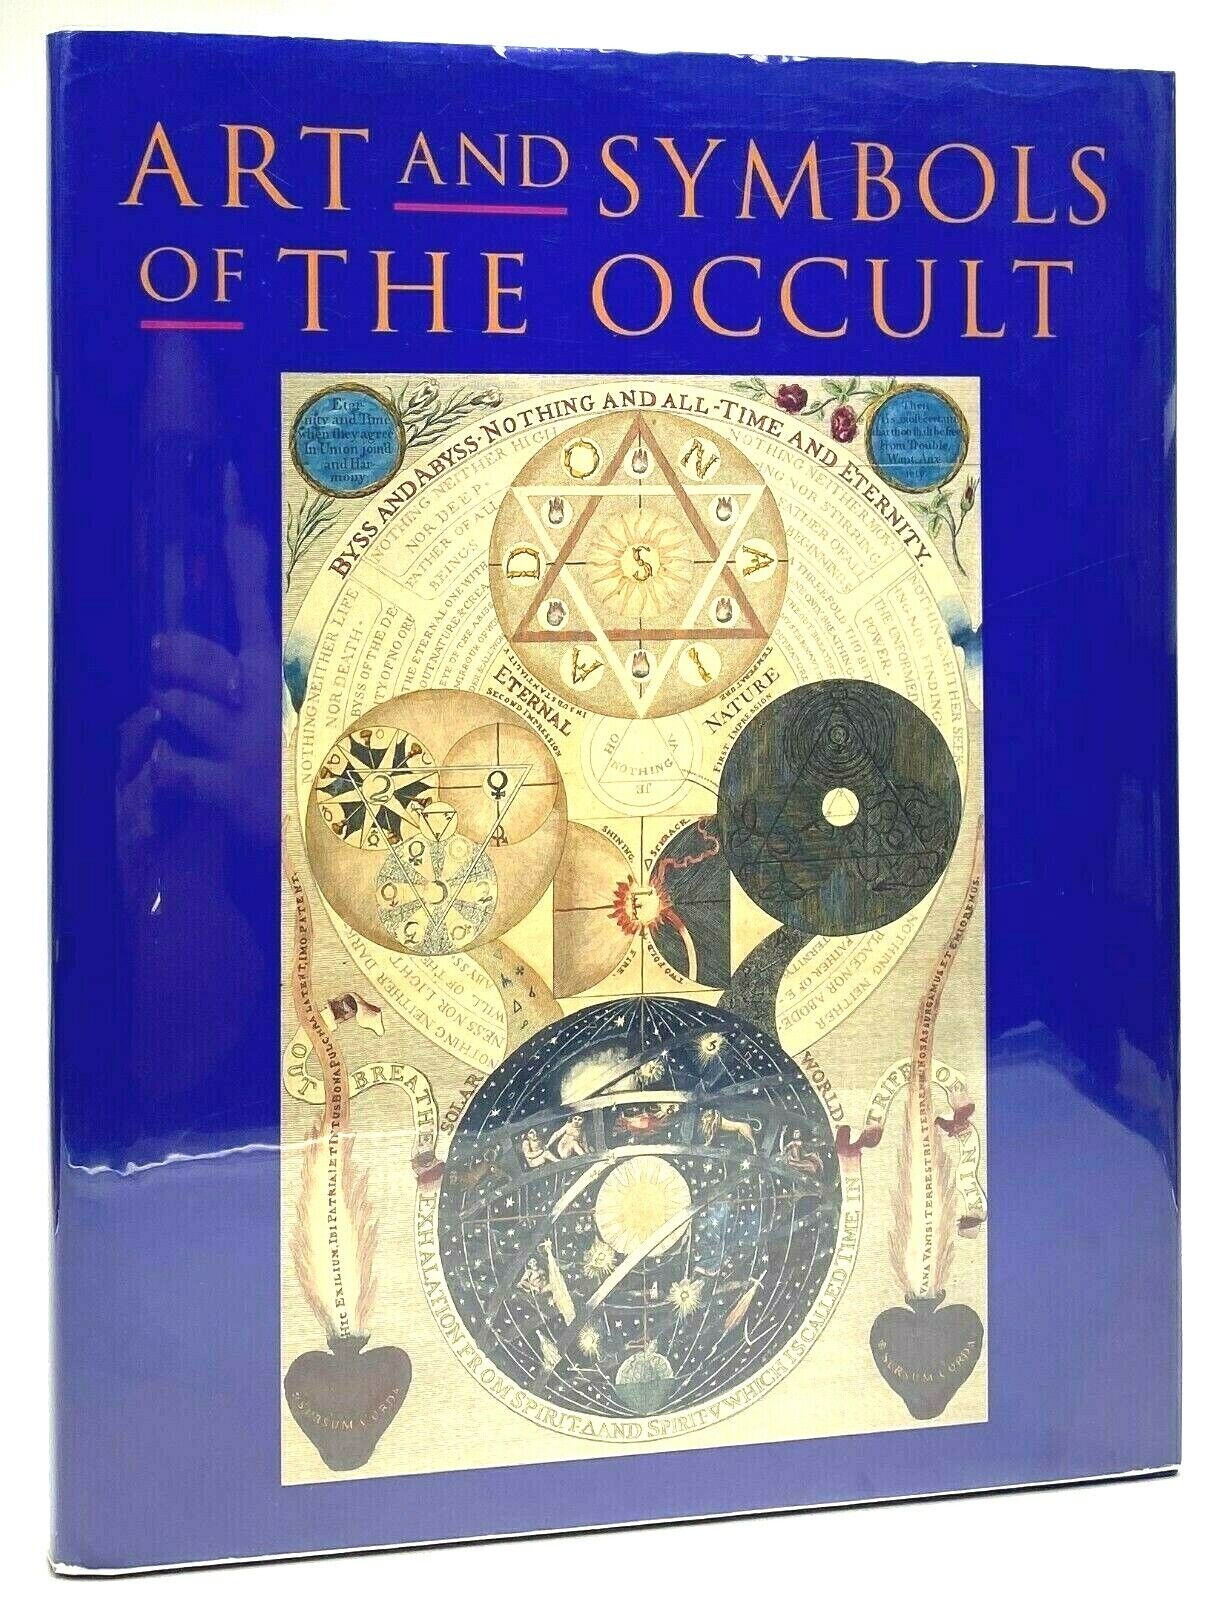 Art and Symbols of the Occult by James Wasserman, 1993 Hardcover Edition  9780892814152 | eBay